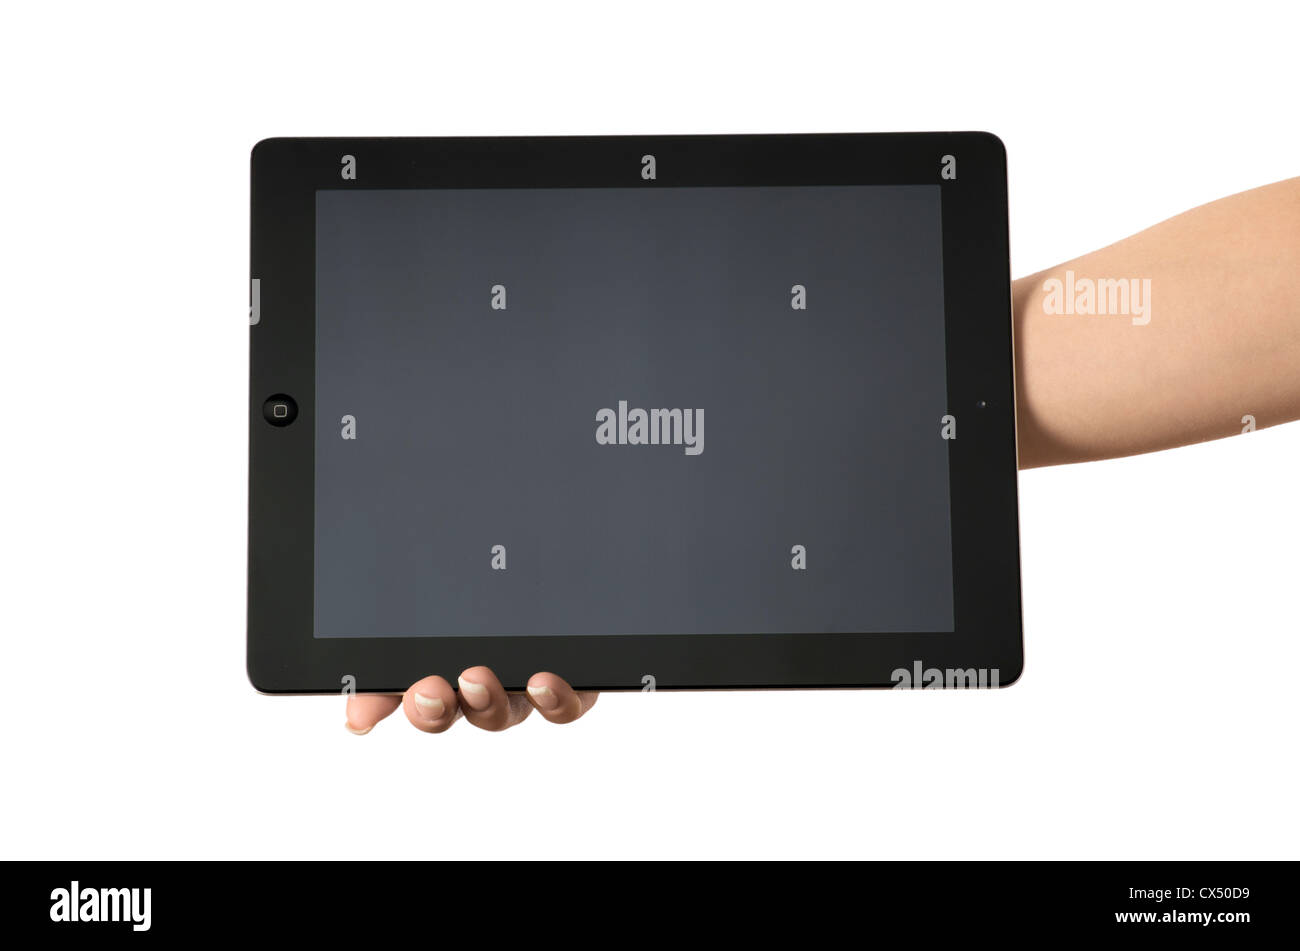 tablet computer in a hand Stock Photo